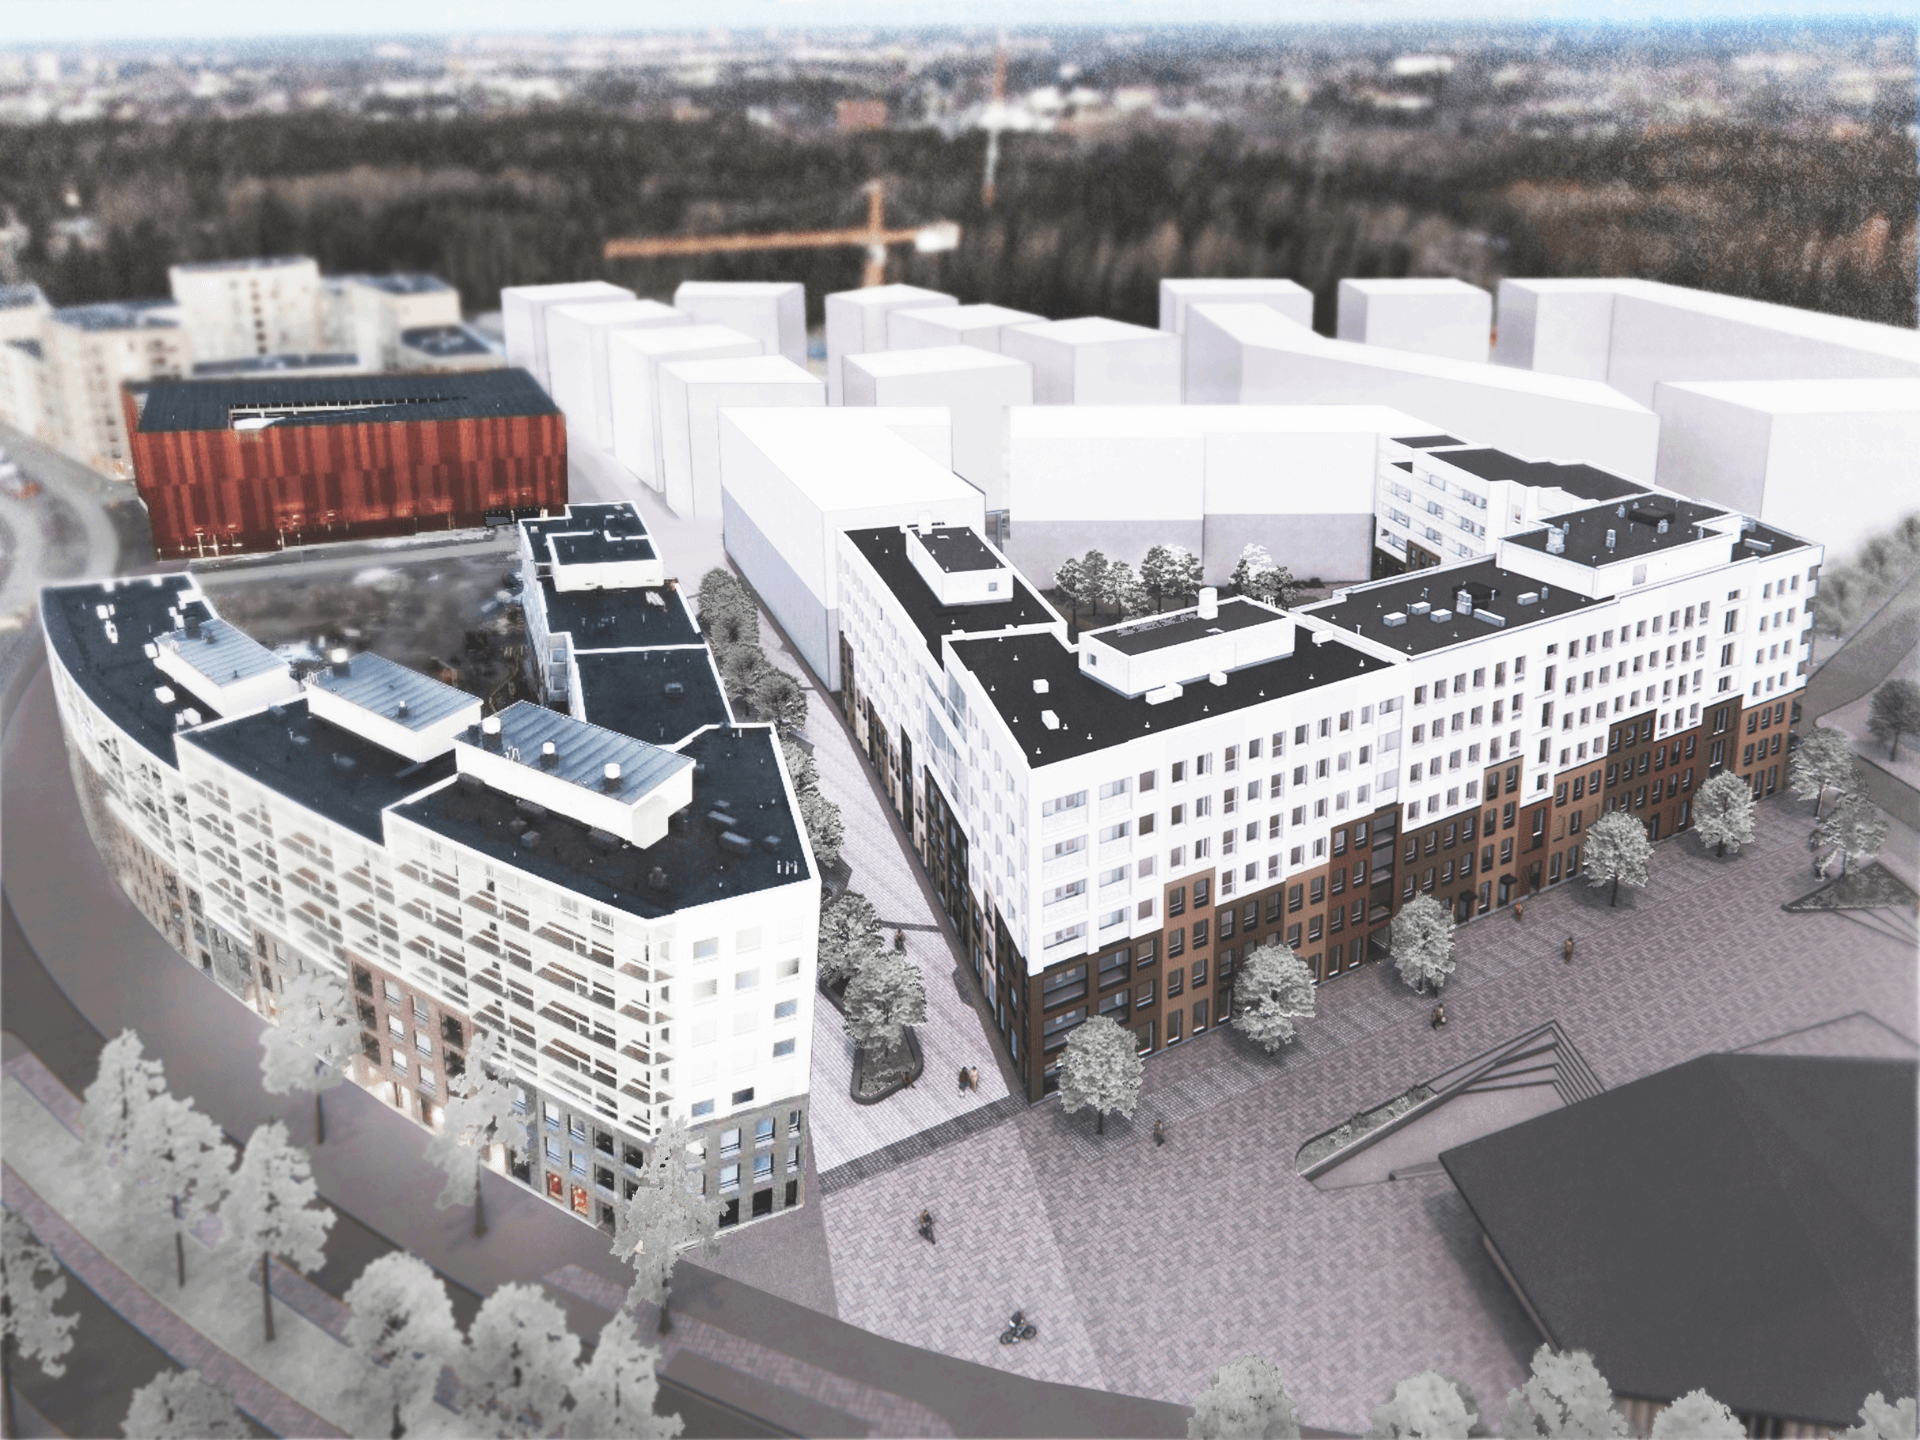 Premico and Fira have agreed on the construction of a rental apartment building in Postipuisto, Helsinki. Illustration of the project. Image:Arkkitehtitoimisto Kanttia 2 Oy